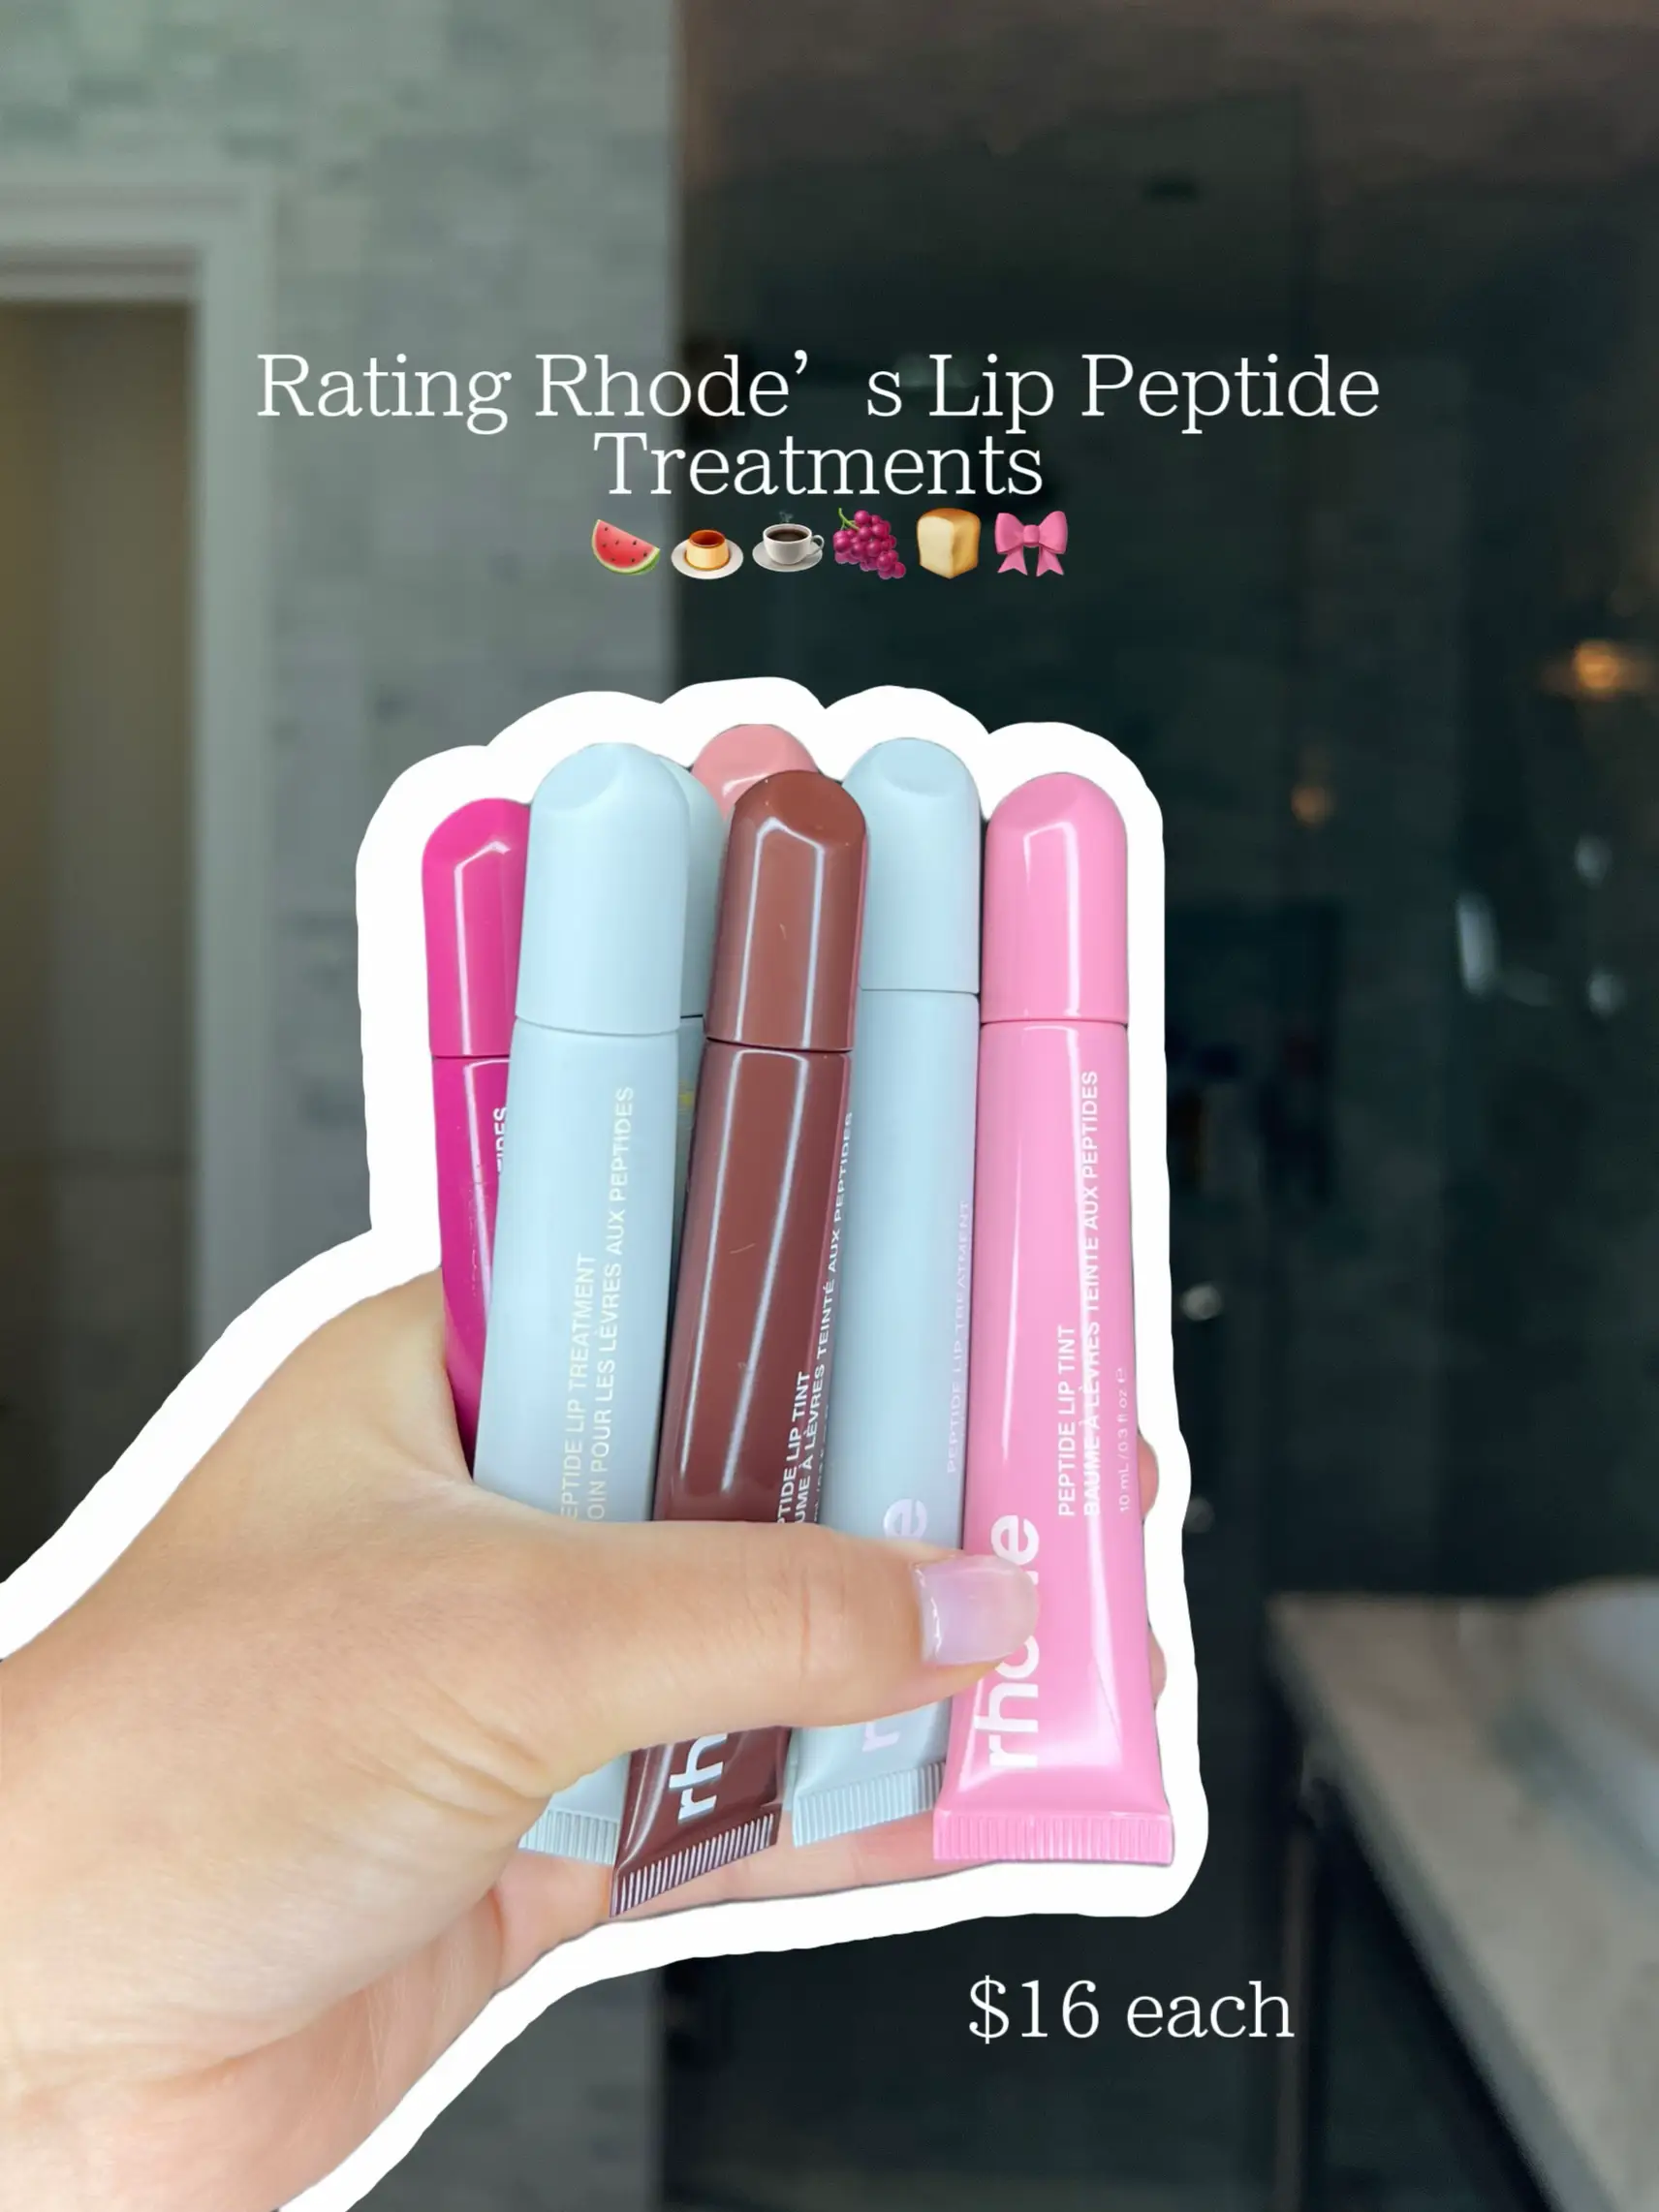 Rating Rhode's Lip Peptide Treatments, Gallery posted by SammyMcClymonds